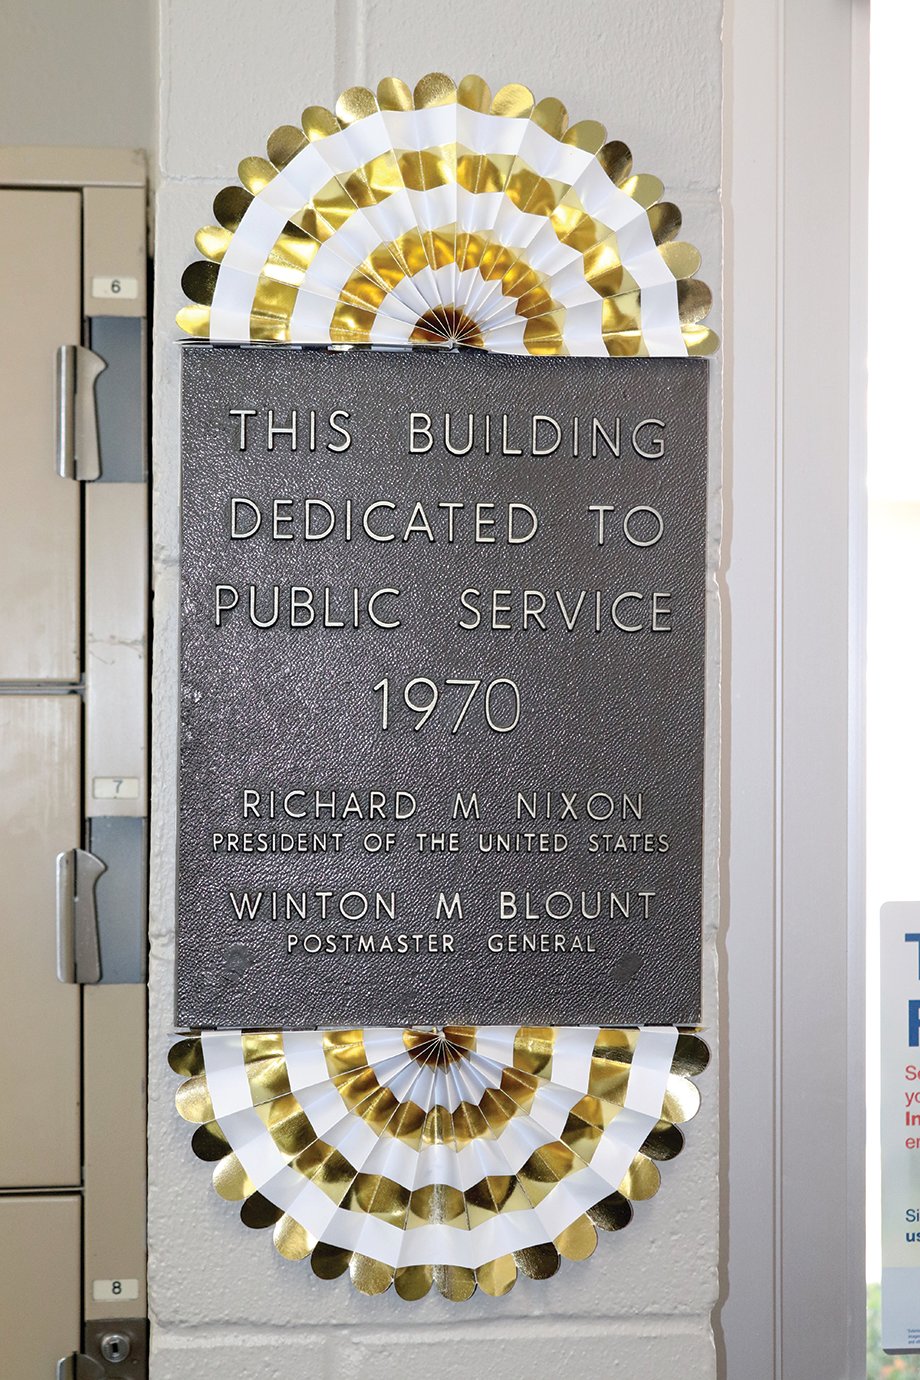 A 1970 plaque dedicating the Wingate Post Office to the community still hangs in its original location. The town's first post office was erected in 1833 as "Pleasant Hill" and remained so until 1882 when it was changed to Wingate; the name was briefly changed to "Whitlock" from 1884-1889 when it was switched back to Wingate.